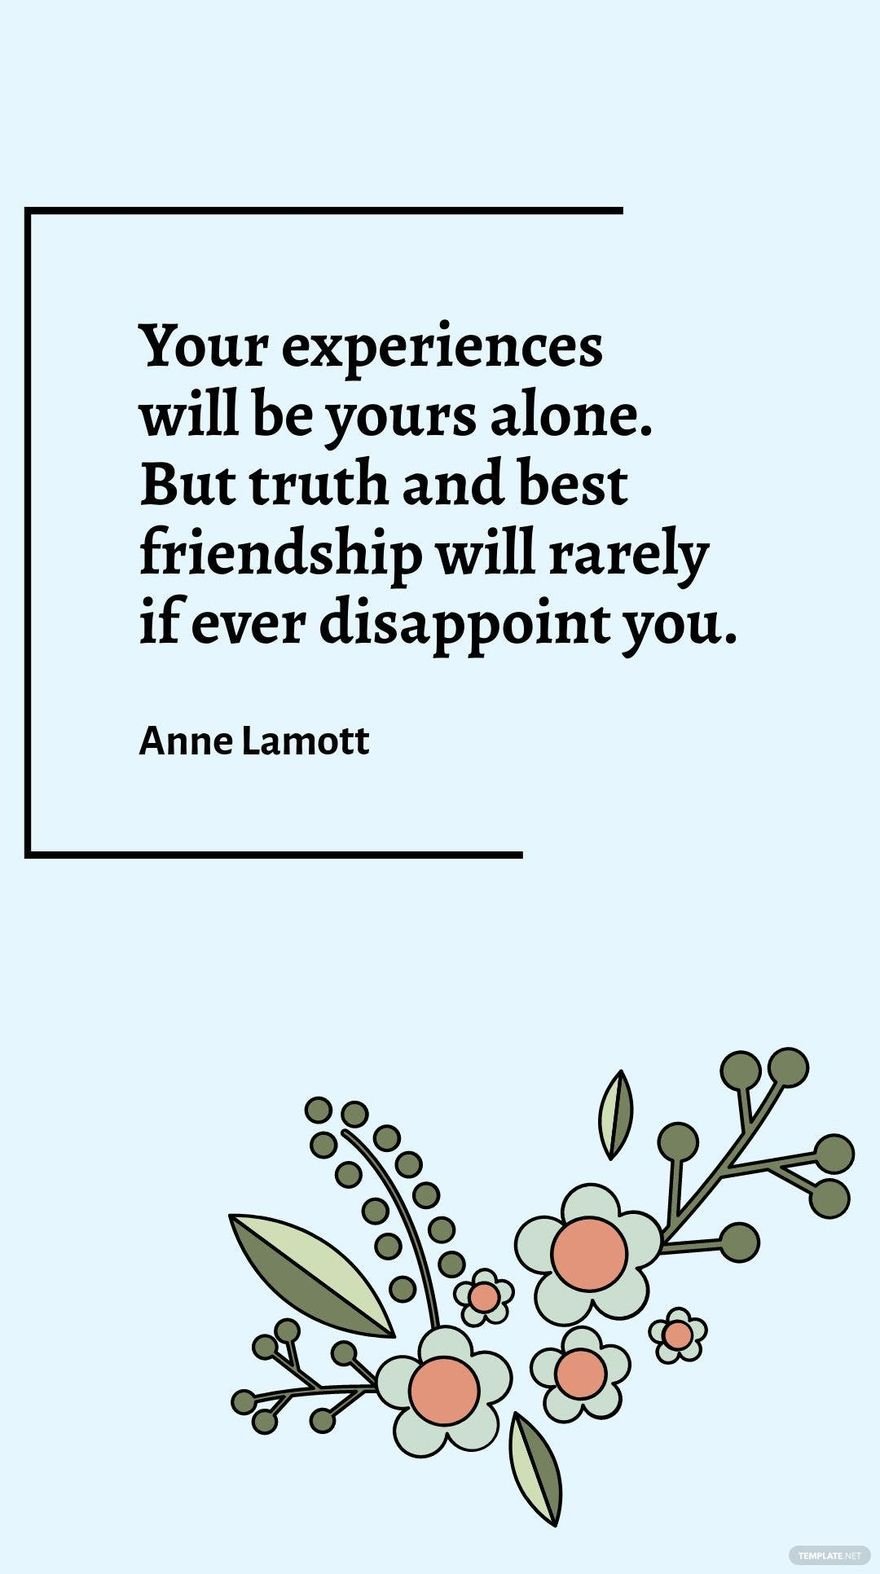 Anne Lamott - Your experiences will be yours alone. But truth and best friendship will rarely if ever disappoint you.